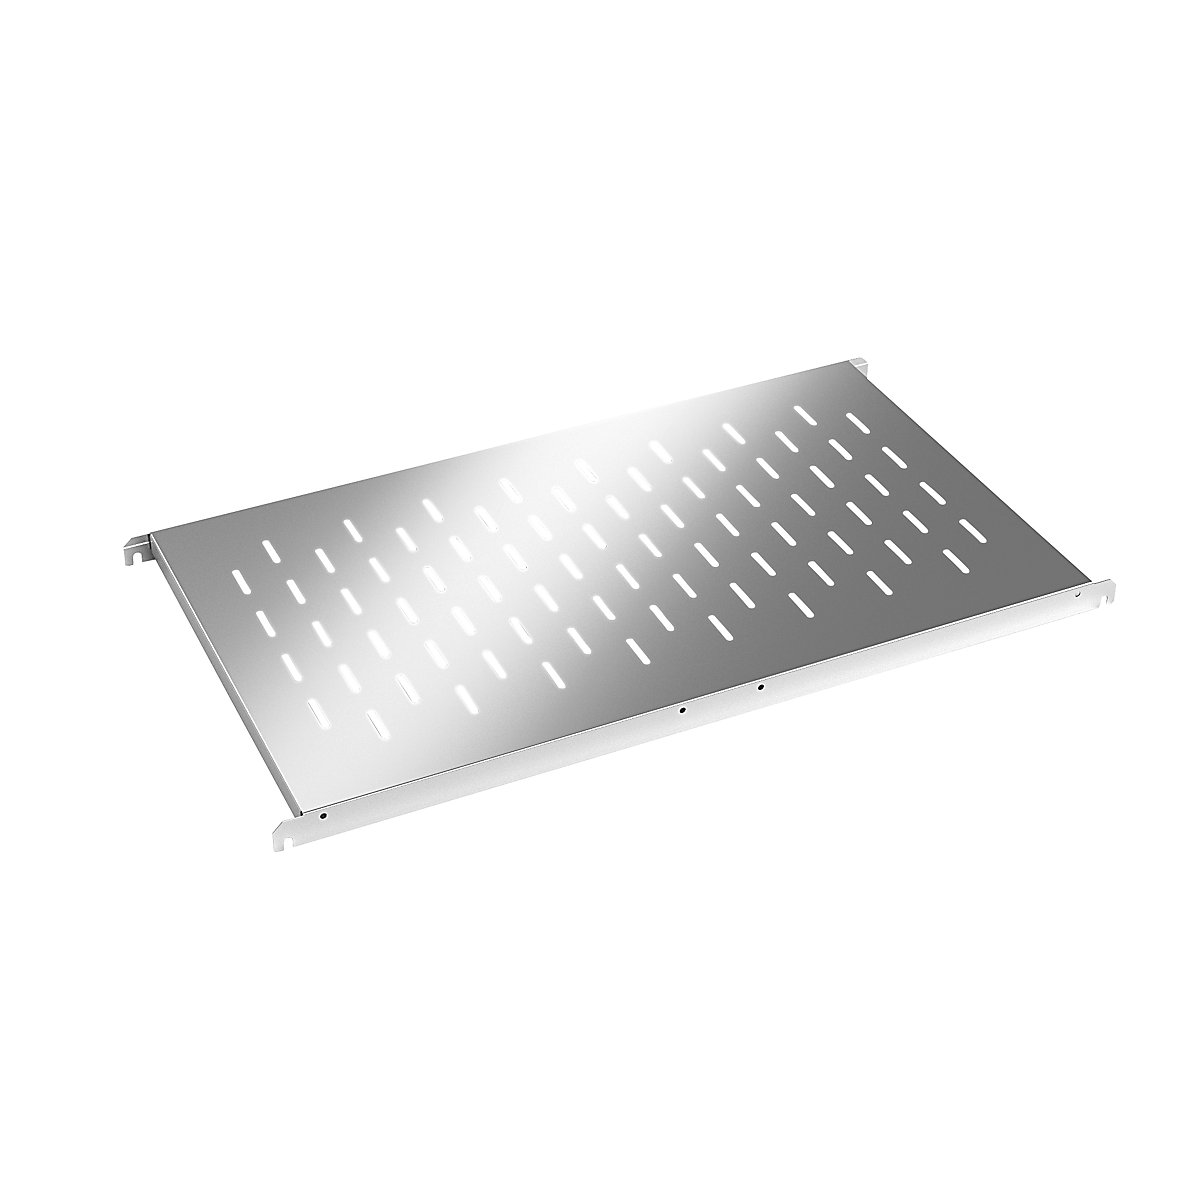 Stainless steel shelf, perforated, WxD 940 x 540 mm